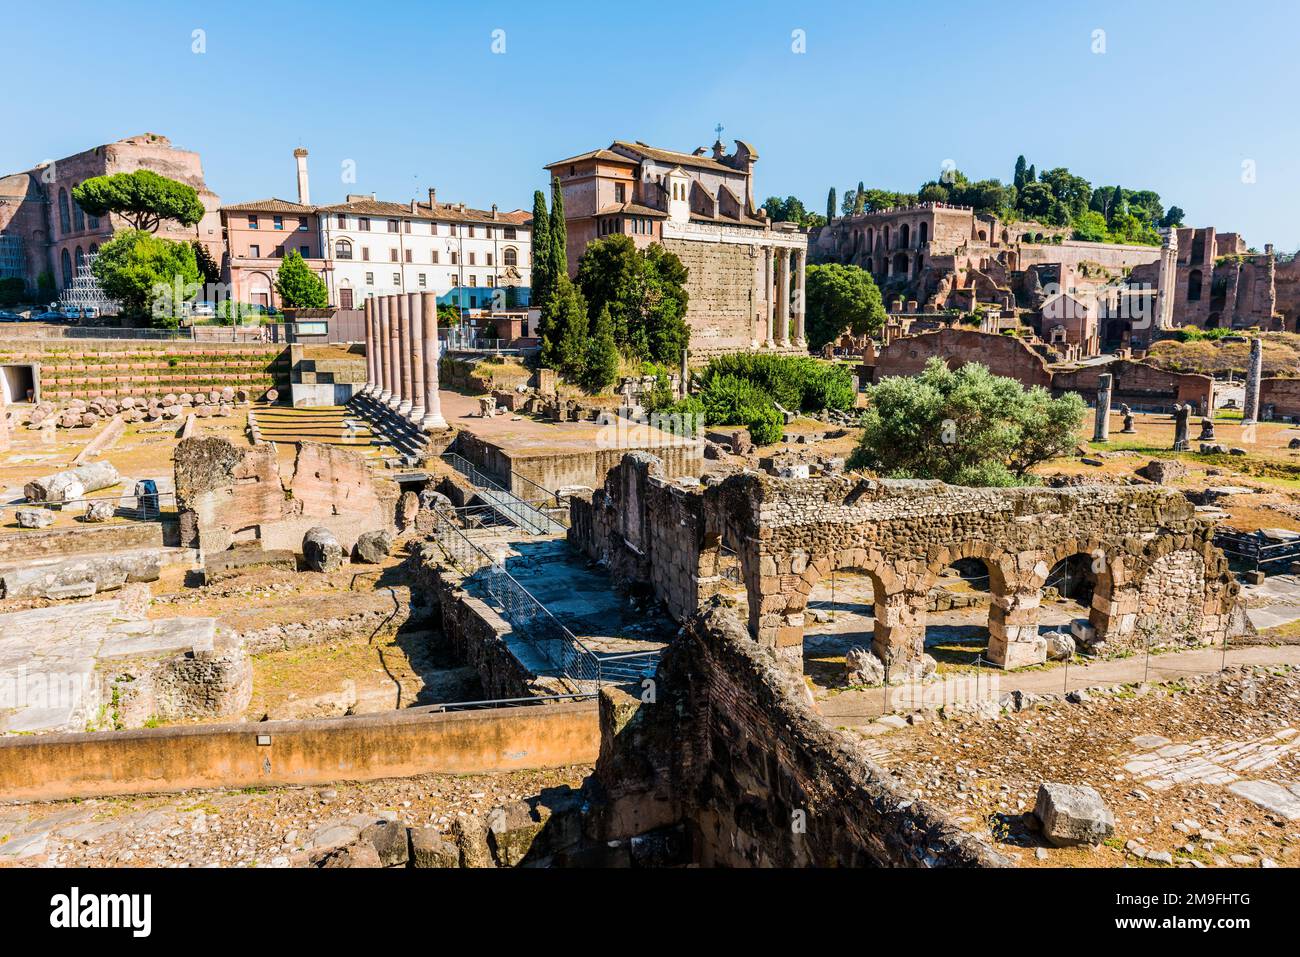 The ancient Roman Forum in Rome, Italy. Roman Forum was ancient Rome's showpiece centre and a grandiose district of temples. Stock Photo